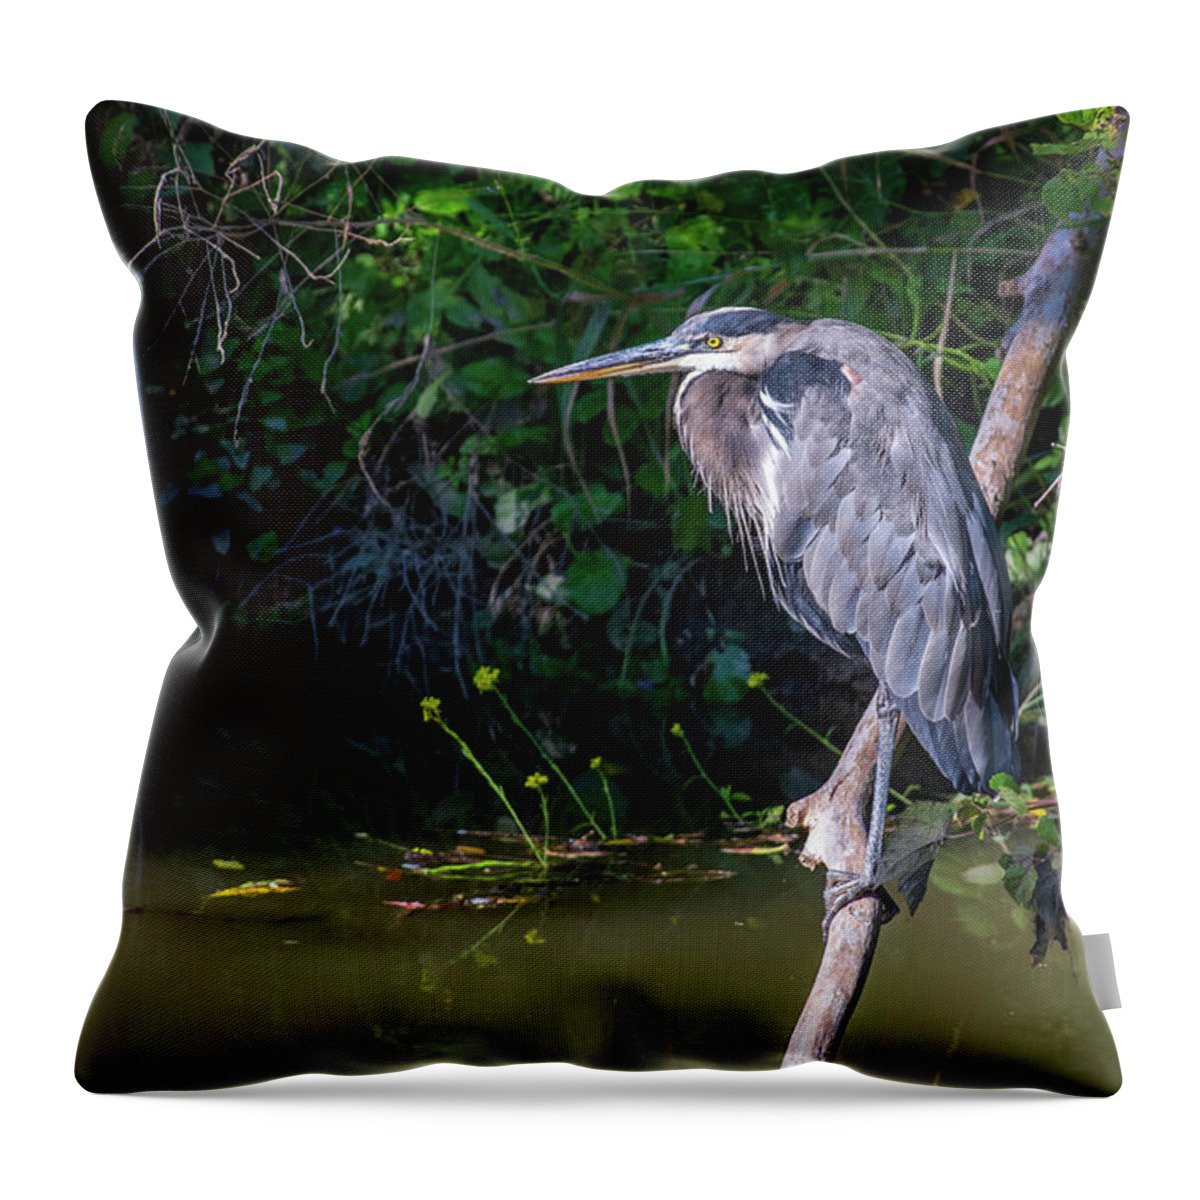 River Throw Pillow featuring the photograph Down by the river by Stephen Sloan